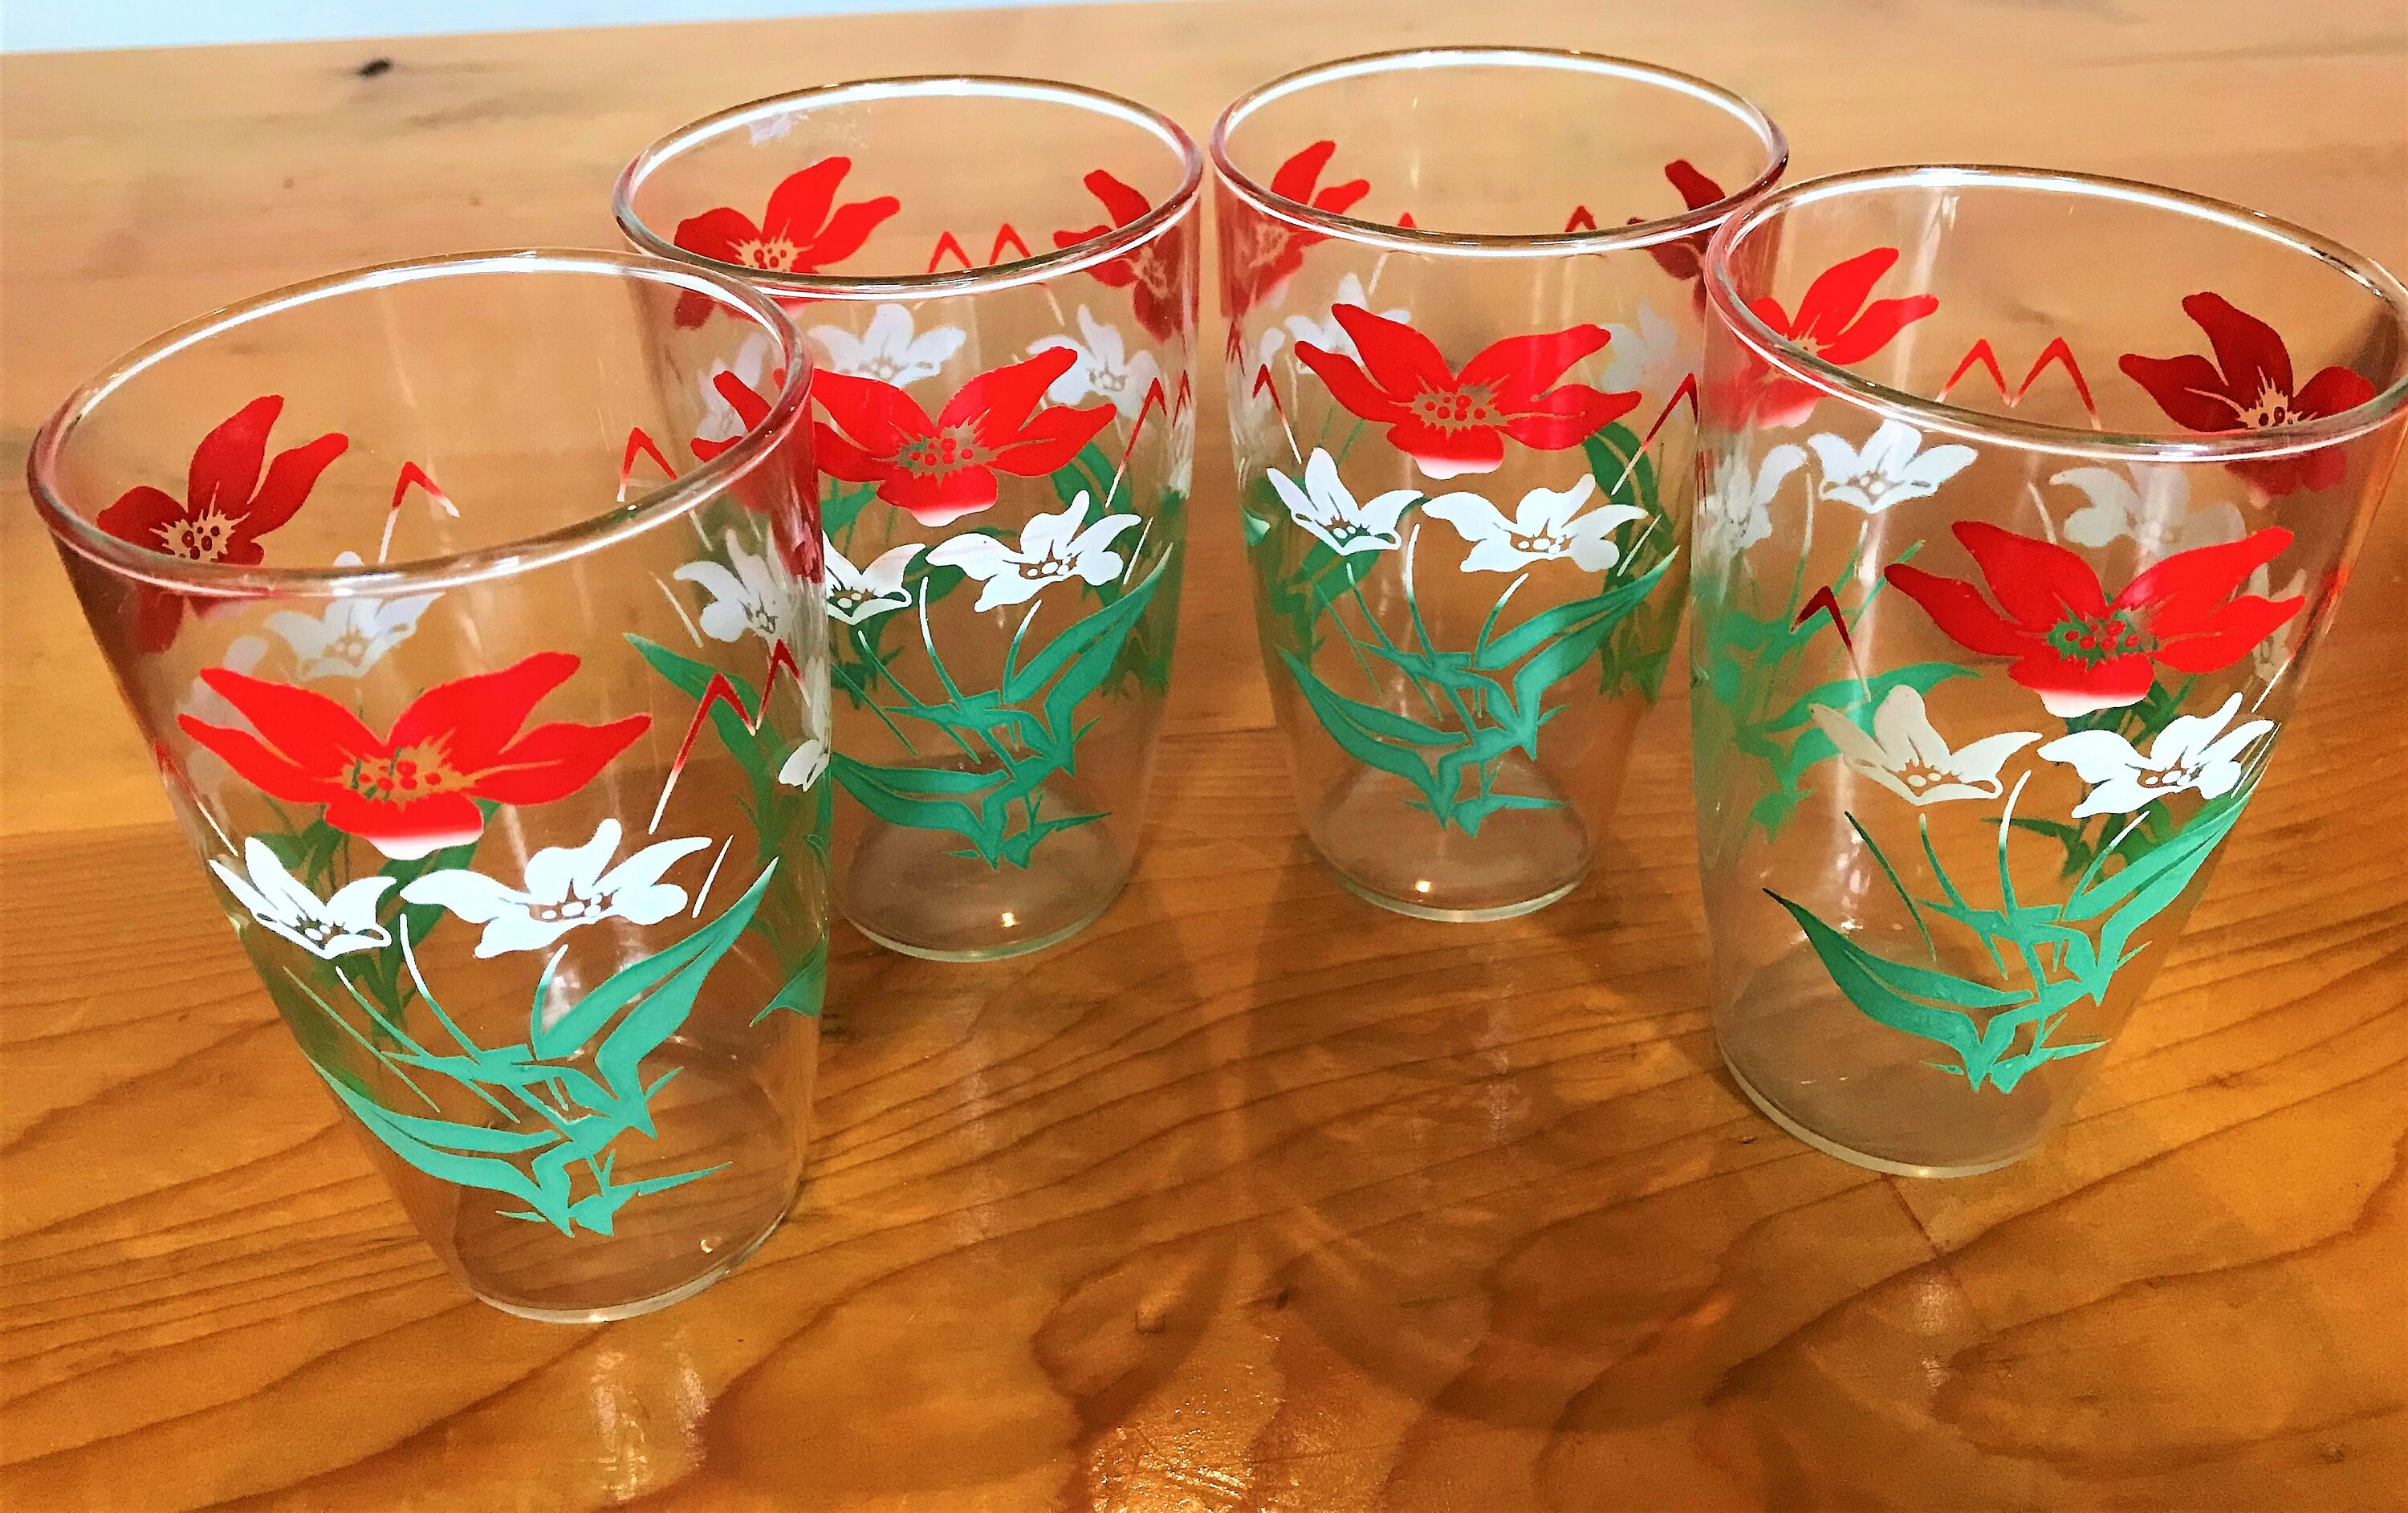 Vertical Pattern Drinking Glasses Vintage Cups For Cocktails, Juice, Iced  Tea, Lemonade Red Wine Christmas Holiday Cup Halloween Gift, Birthday Gif,  Christmas Gift Aesthetic Room Decor Art Supplies Summer Winter Drinkware 